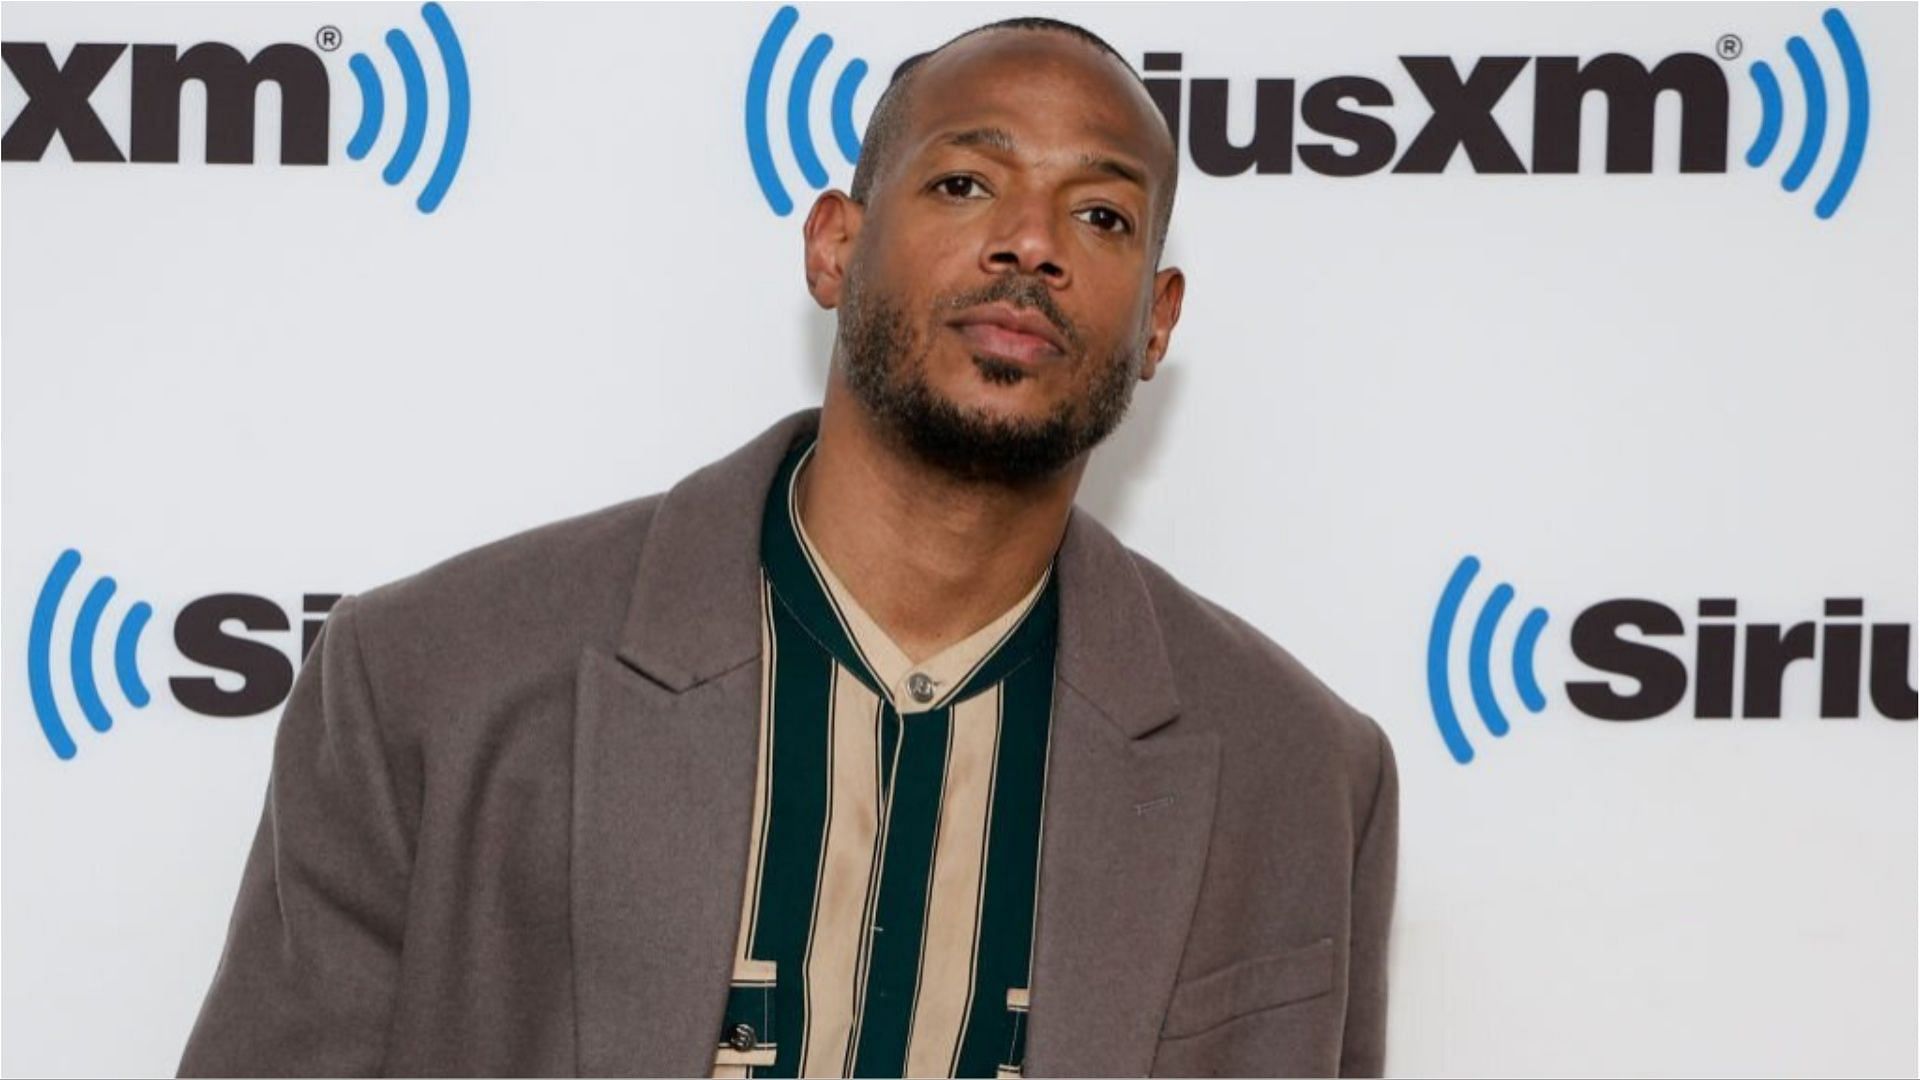 Marlon Wayans was removed from a United Airlines flight for getting involved in a dispute (Image via Jason Mendez/Getty Images)